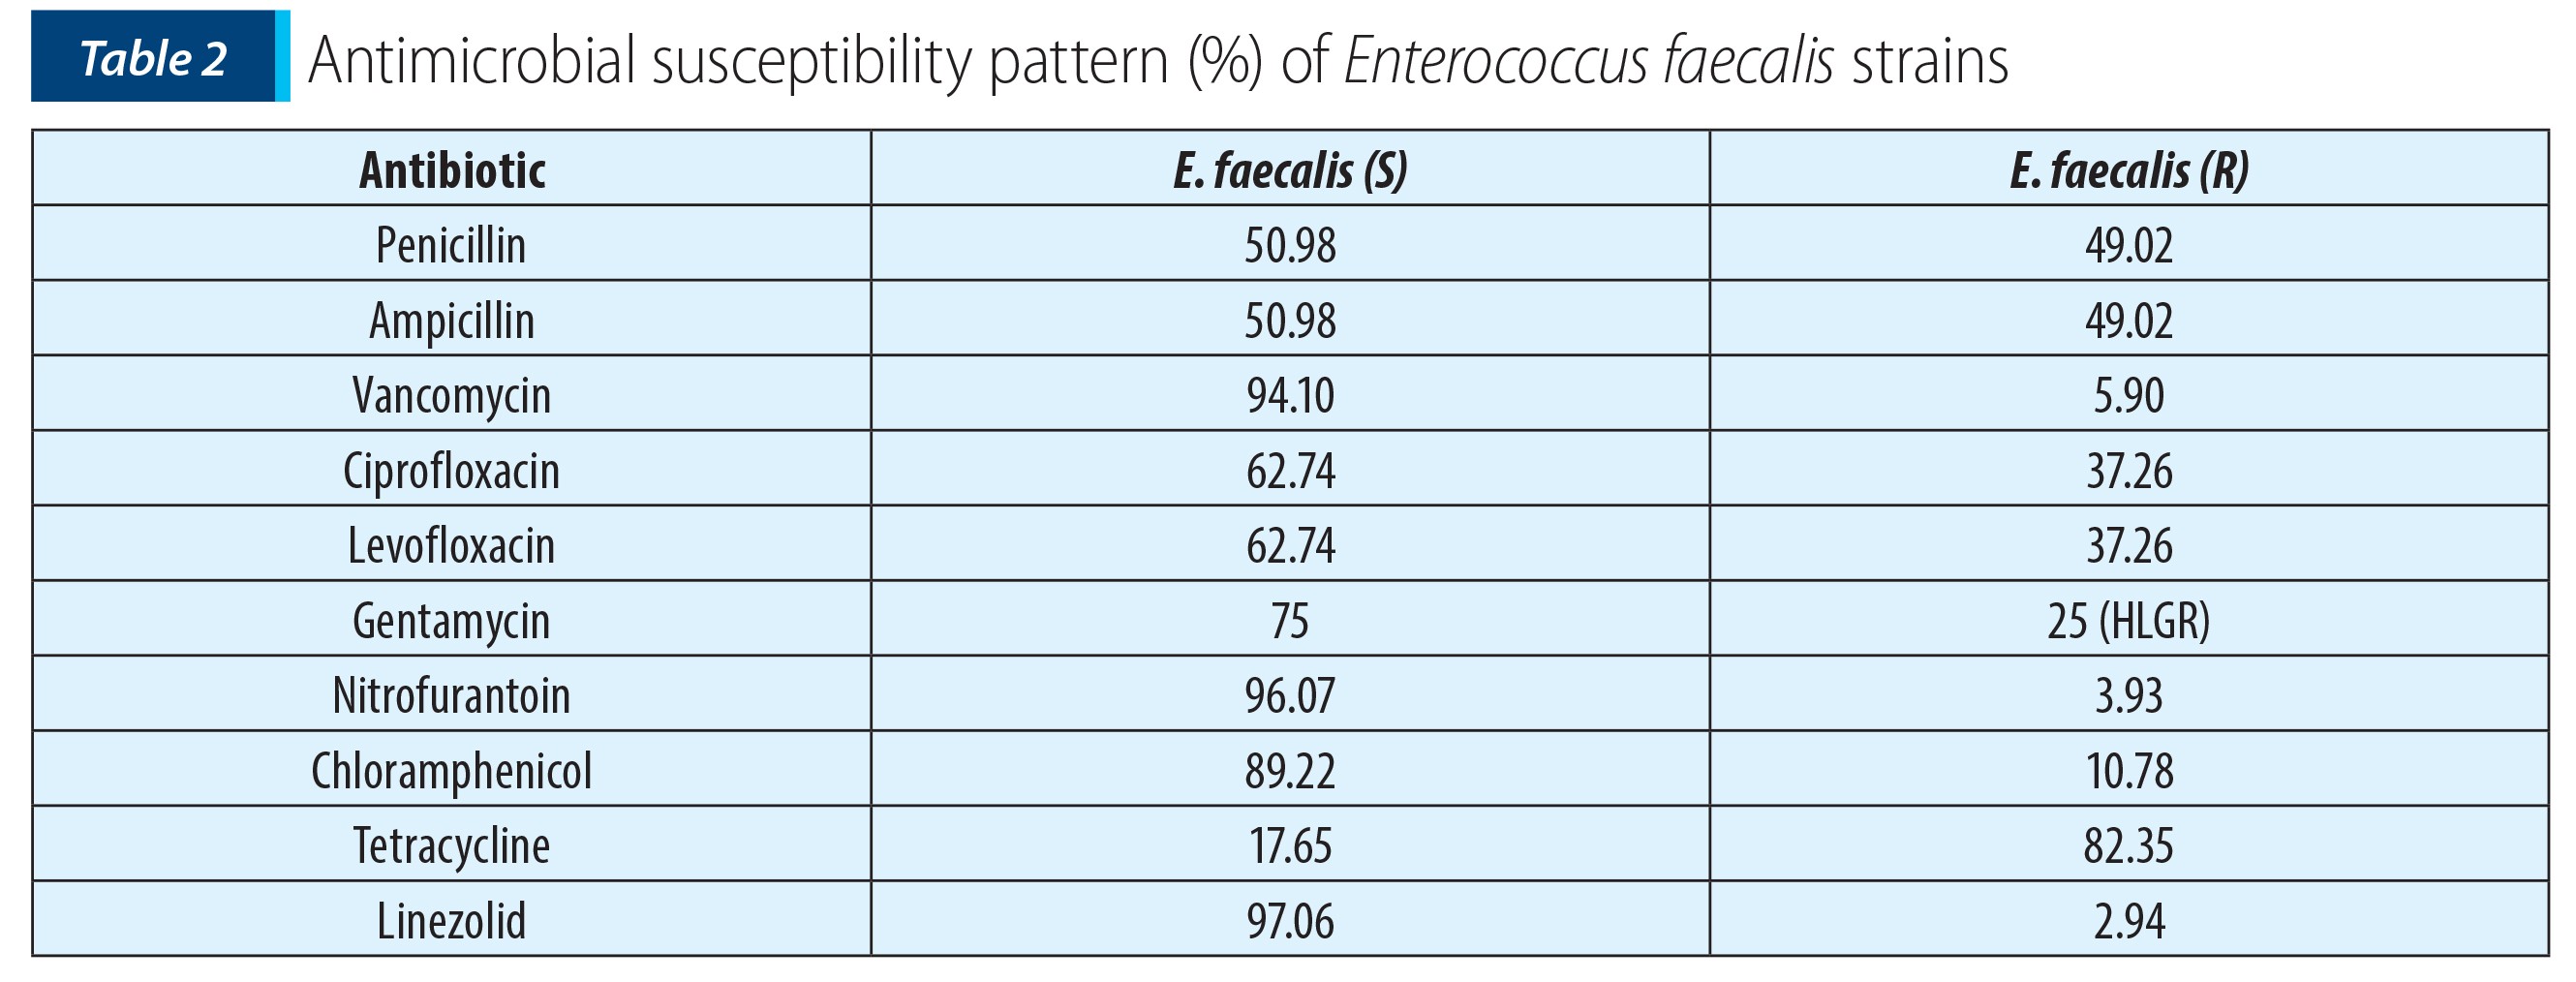 Table 2; Antimicrobial susceptibility pattern (%) of Enterococcus faecalis strains